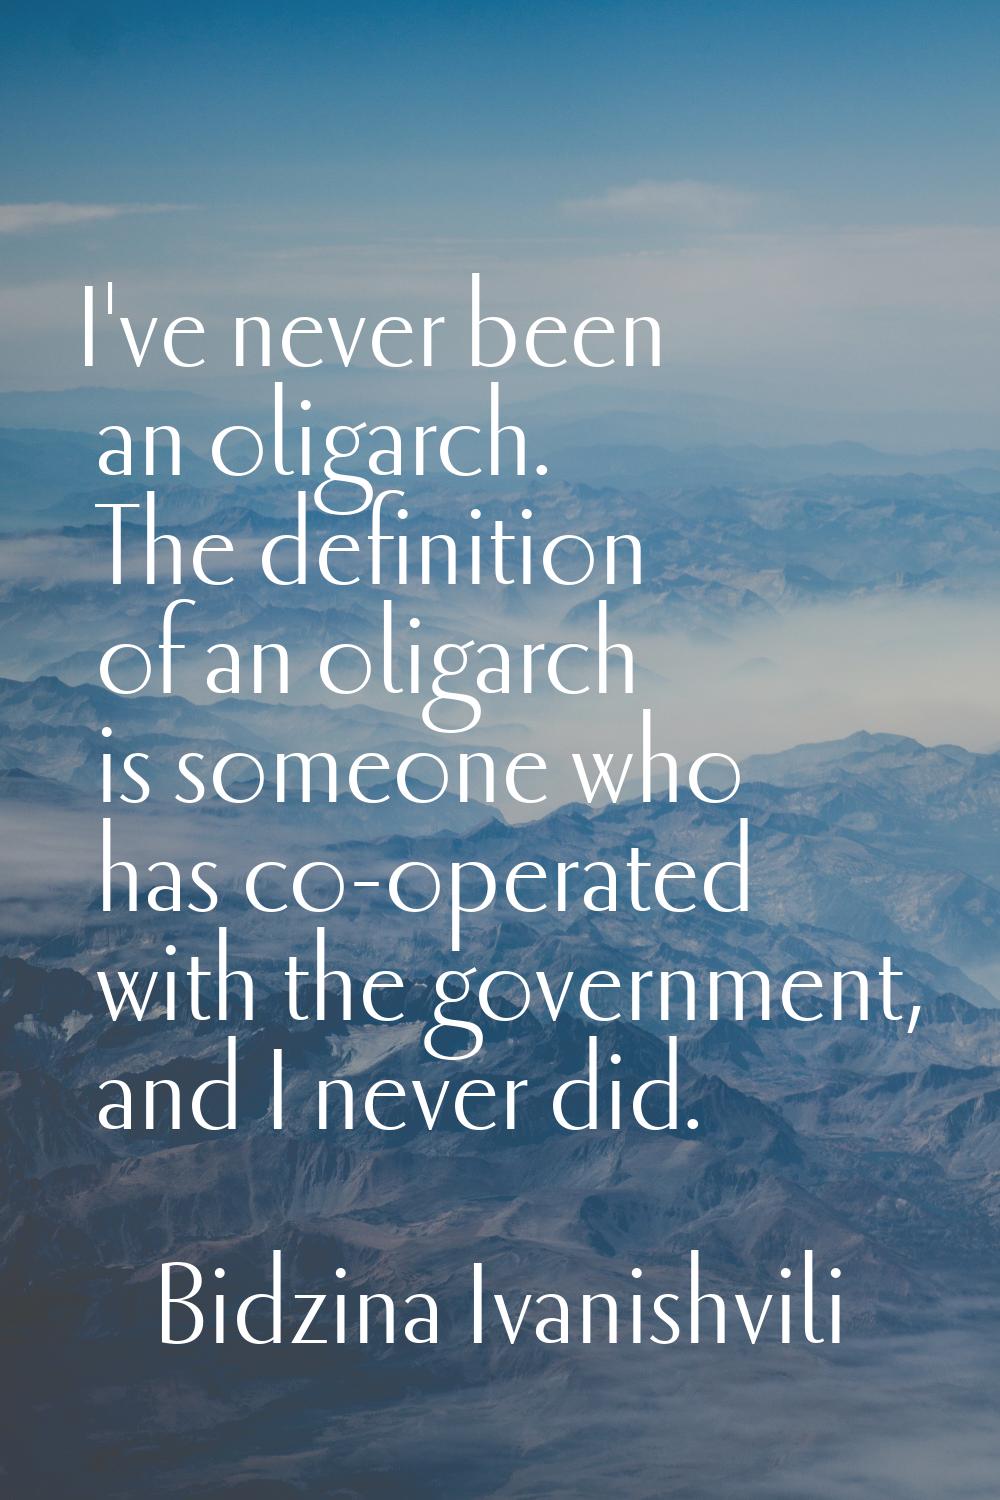 I've never been an oligarch. The definition of an oligarch is someone who has co-operated with the 